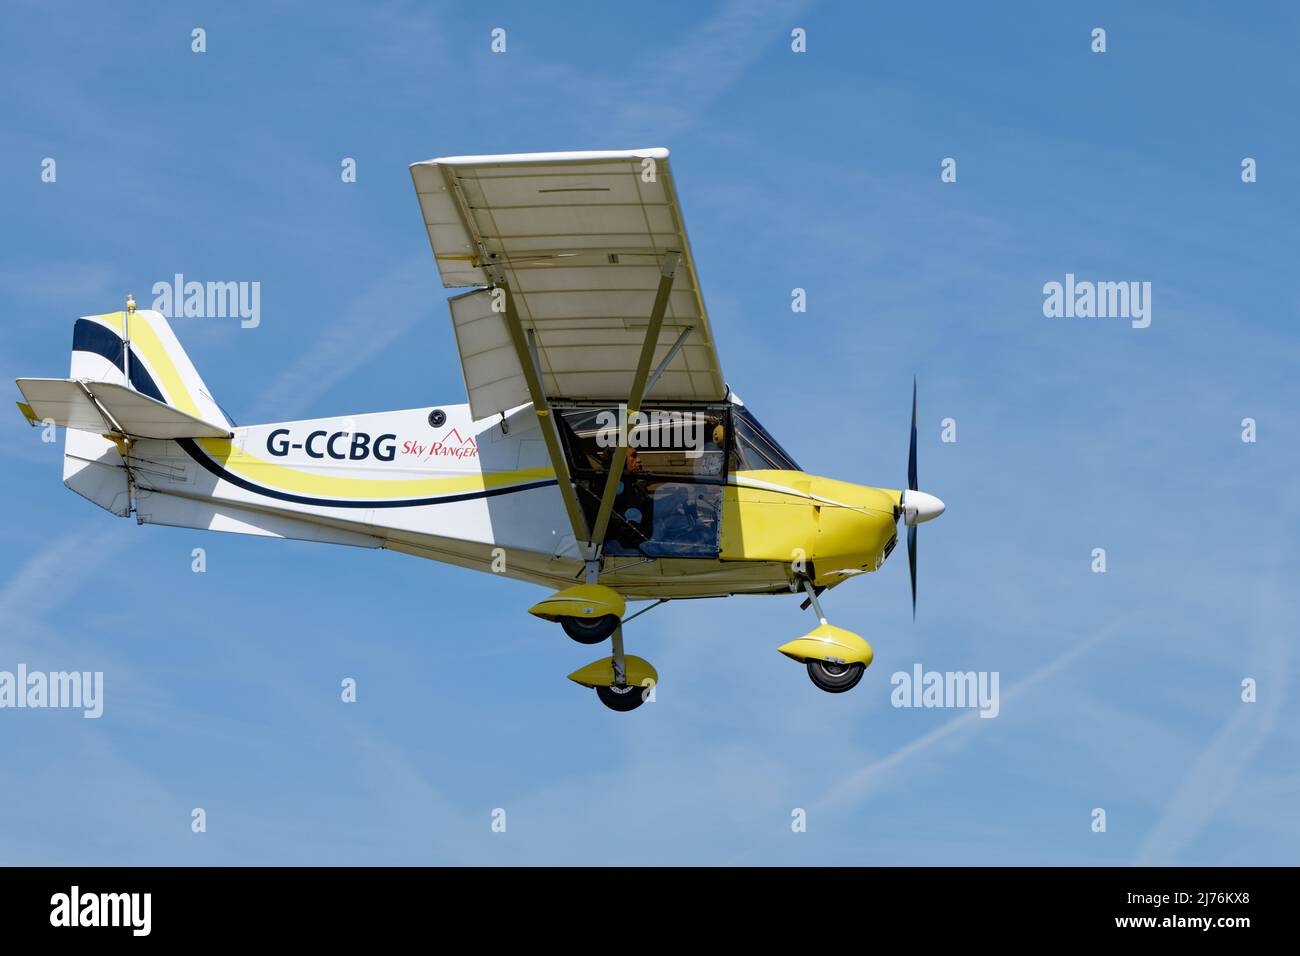 Skyranger Swift microlight aeroplane G-CCBG arrives over Popham airfield in Hampshire England to attend the annual microlight aircraft fly-in meeting Stock Photo